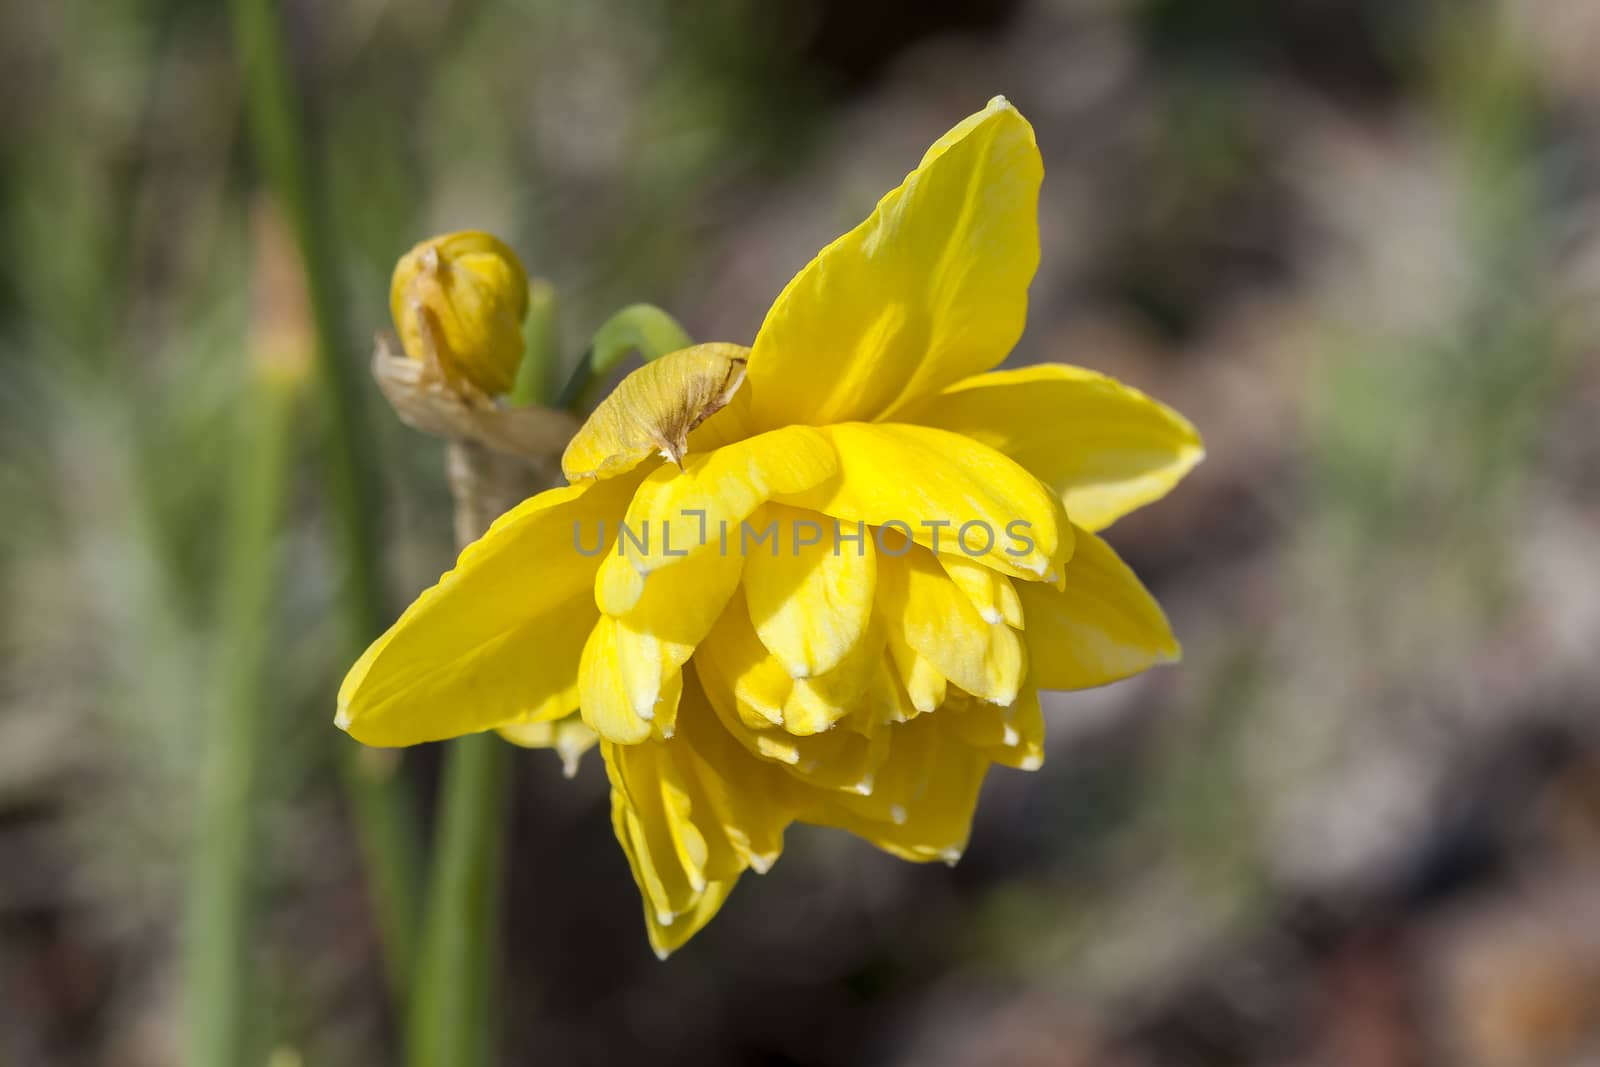 Daffodil (narcissus) 'Pencrebar' growing outdoors in the spring season